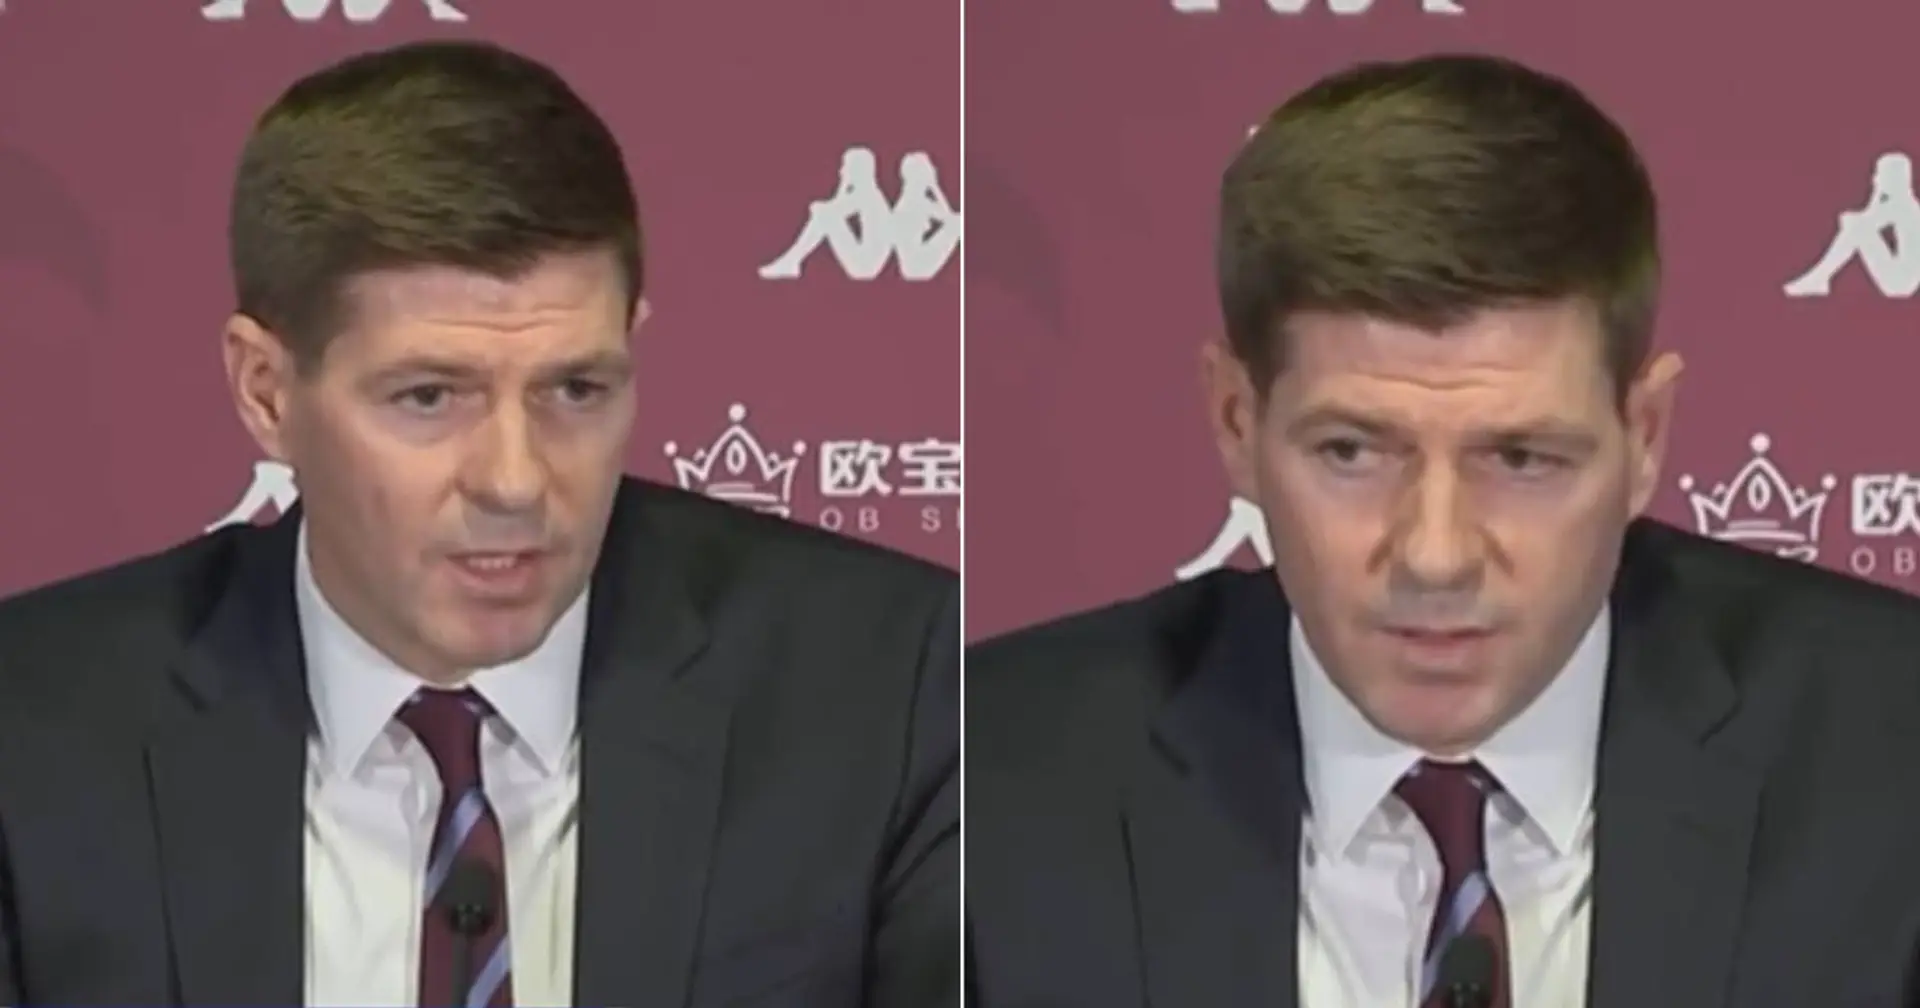 'It's very unfair': Gerrard reacts to 'stepping stone' narrative in first Aston Villa press conference